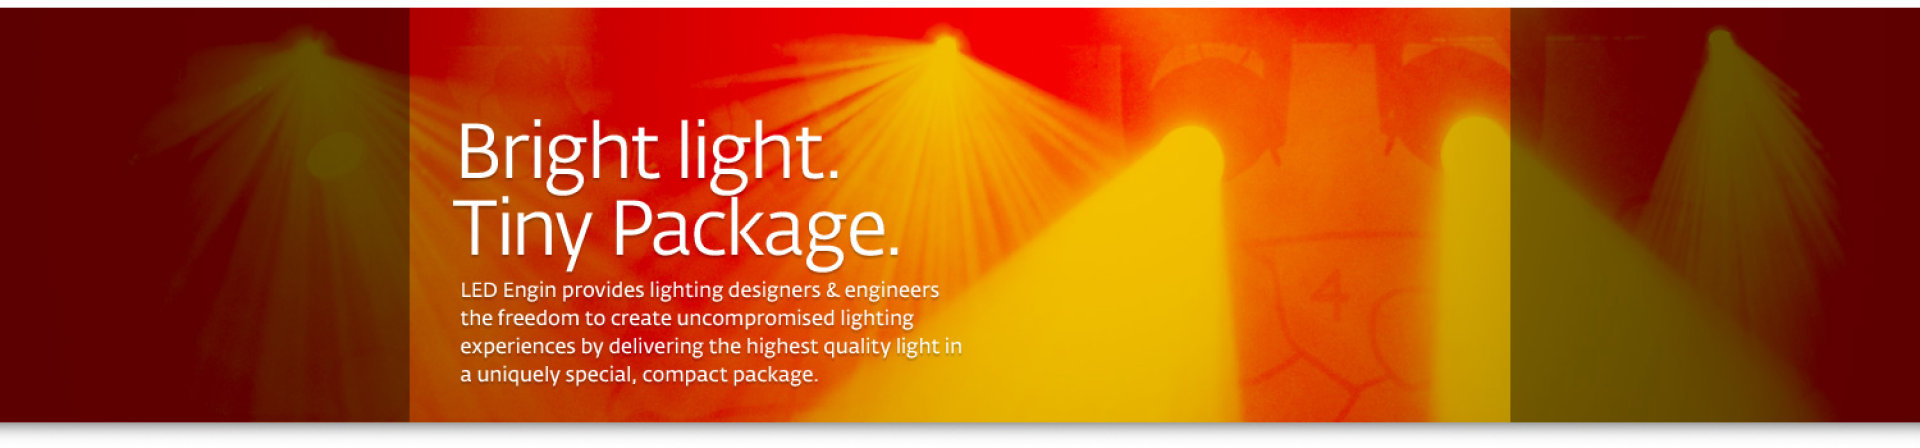 Banner for bright light, tiny packages